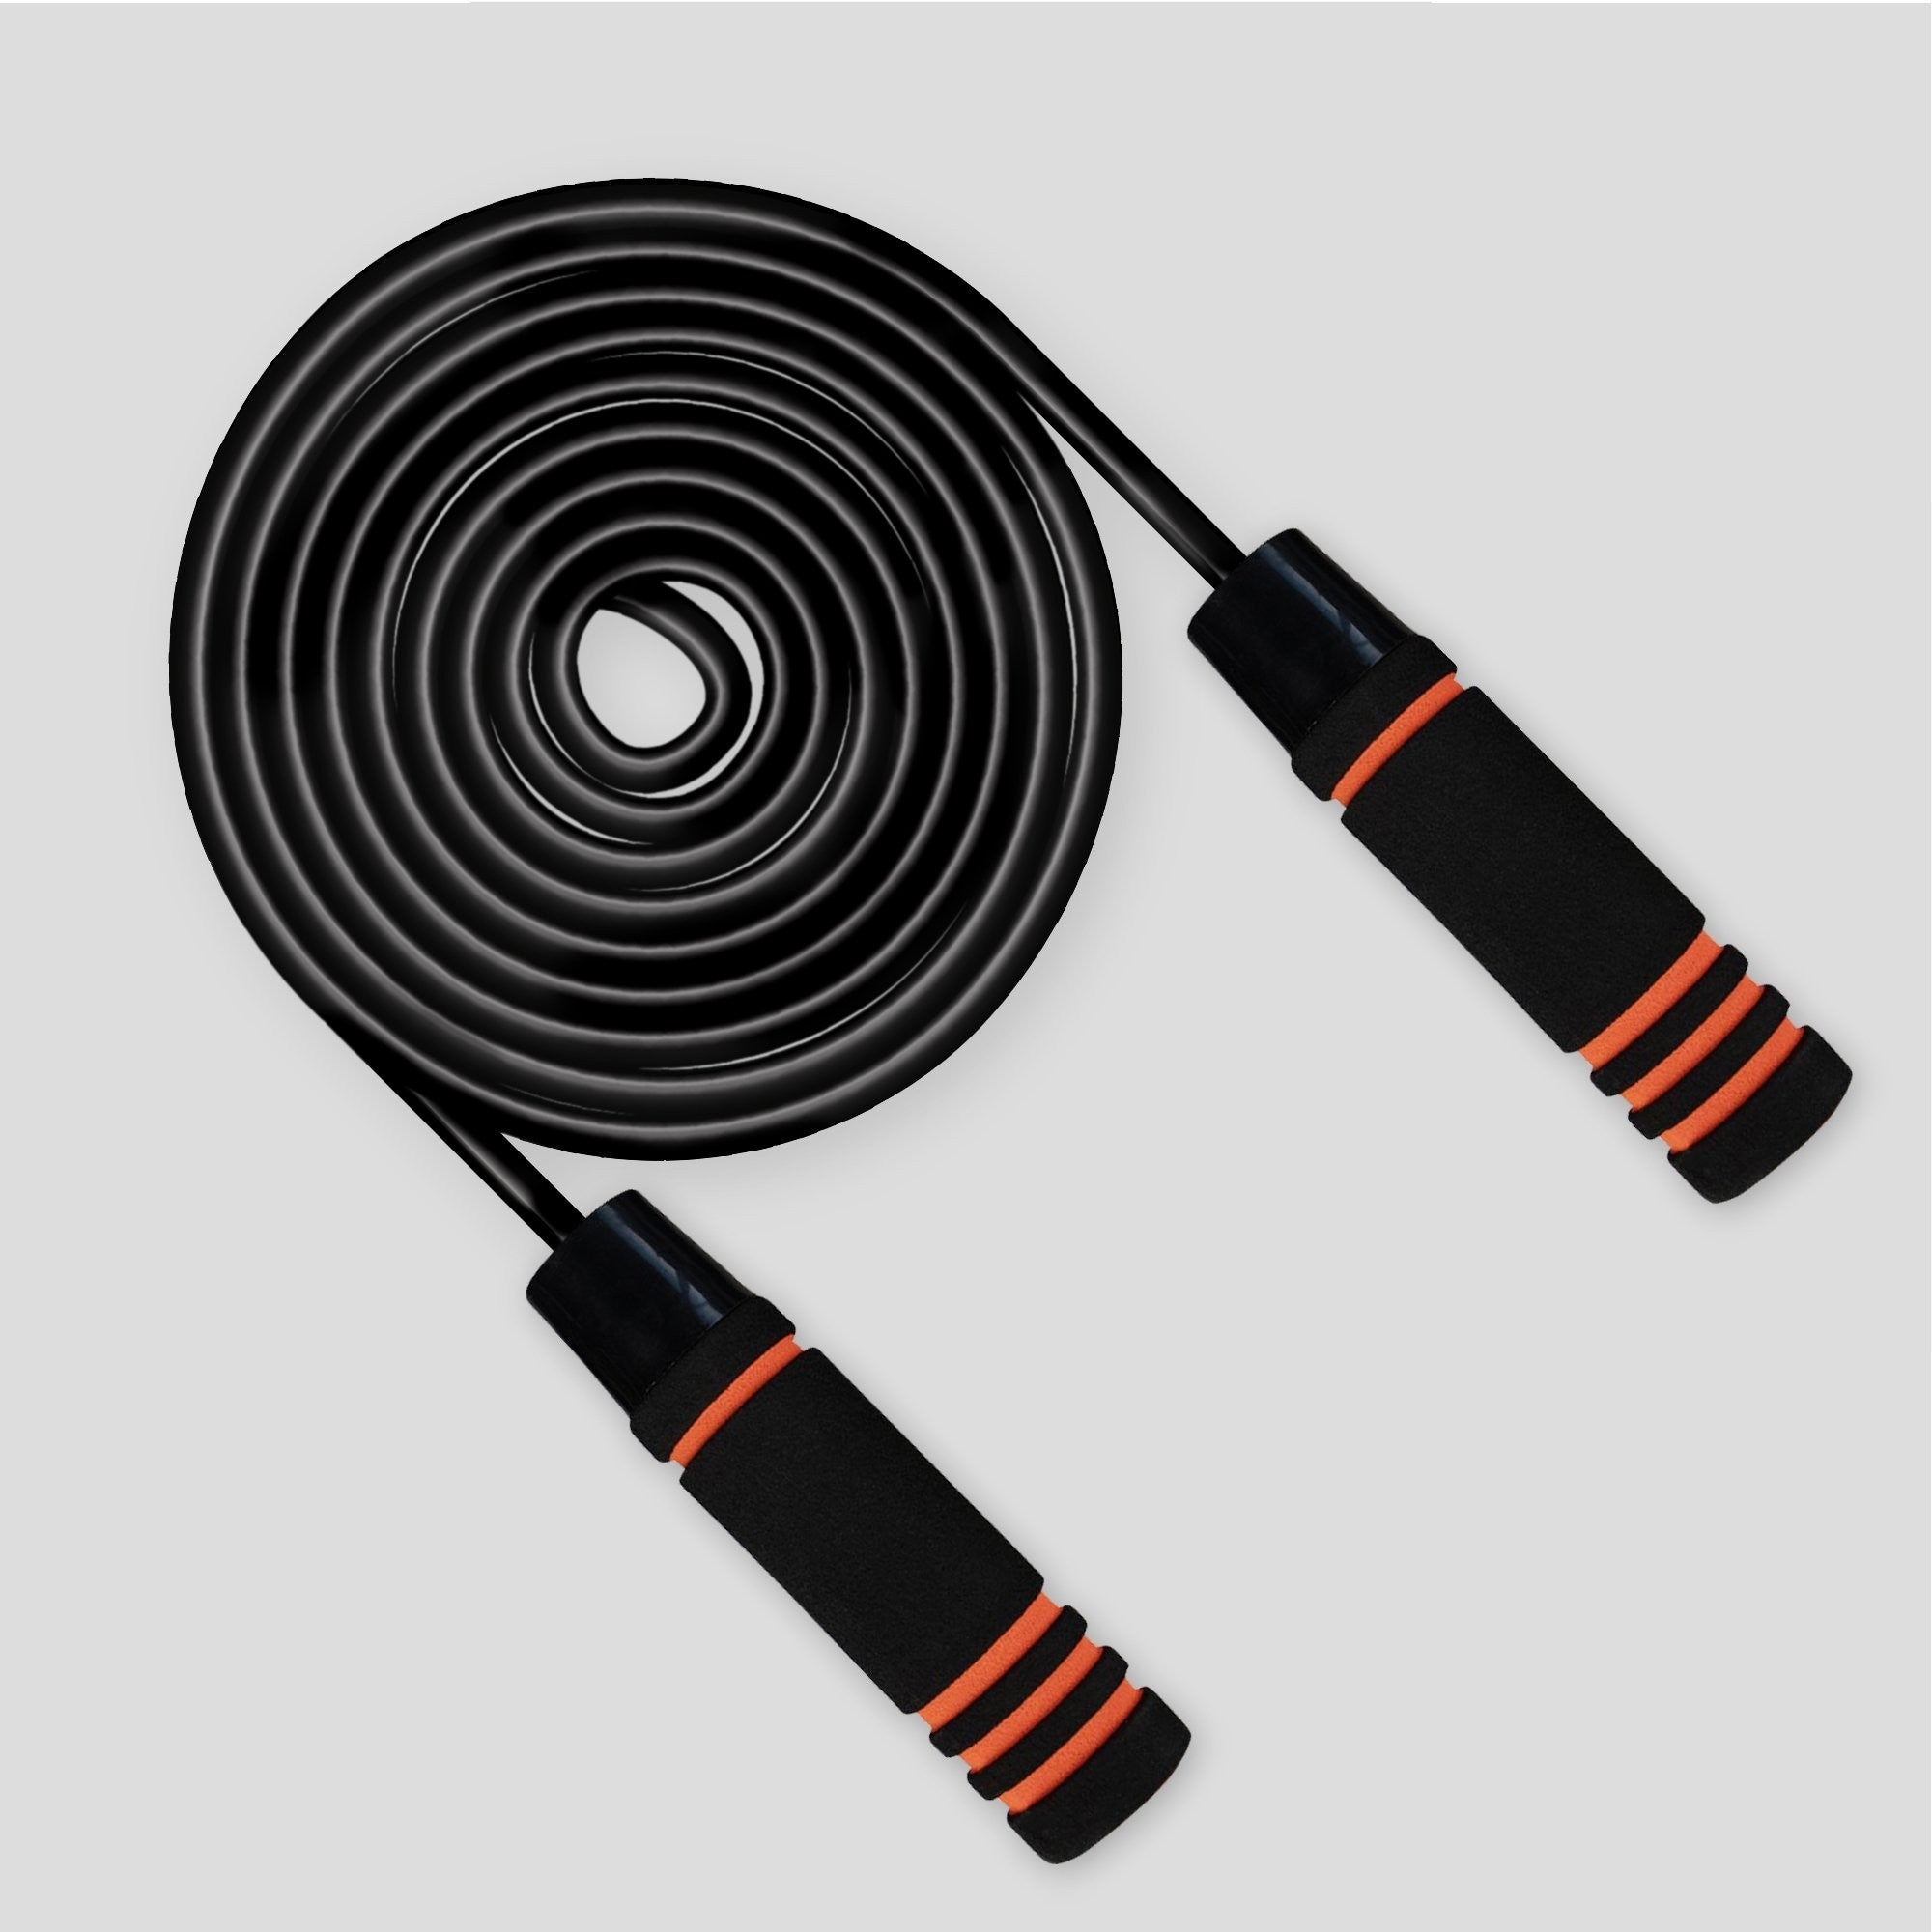 Weighted Skipping Jump Rope | Fitness Equipment Dublin